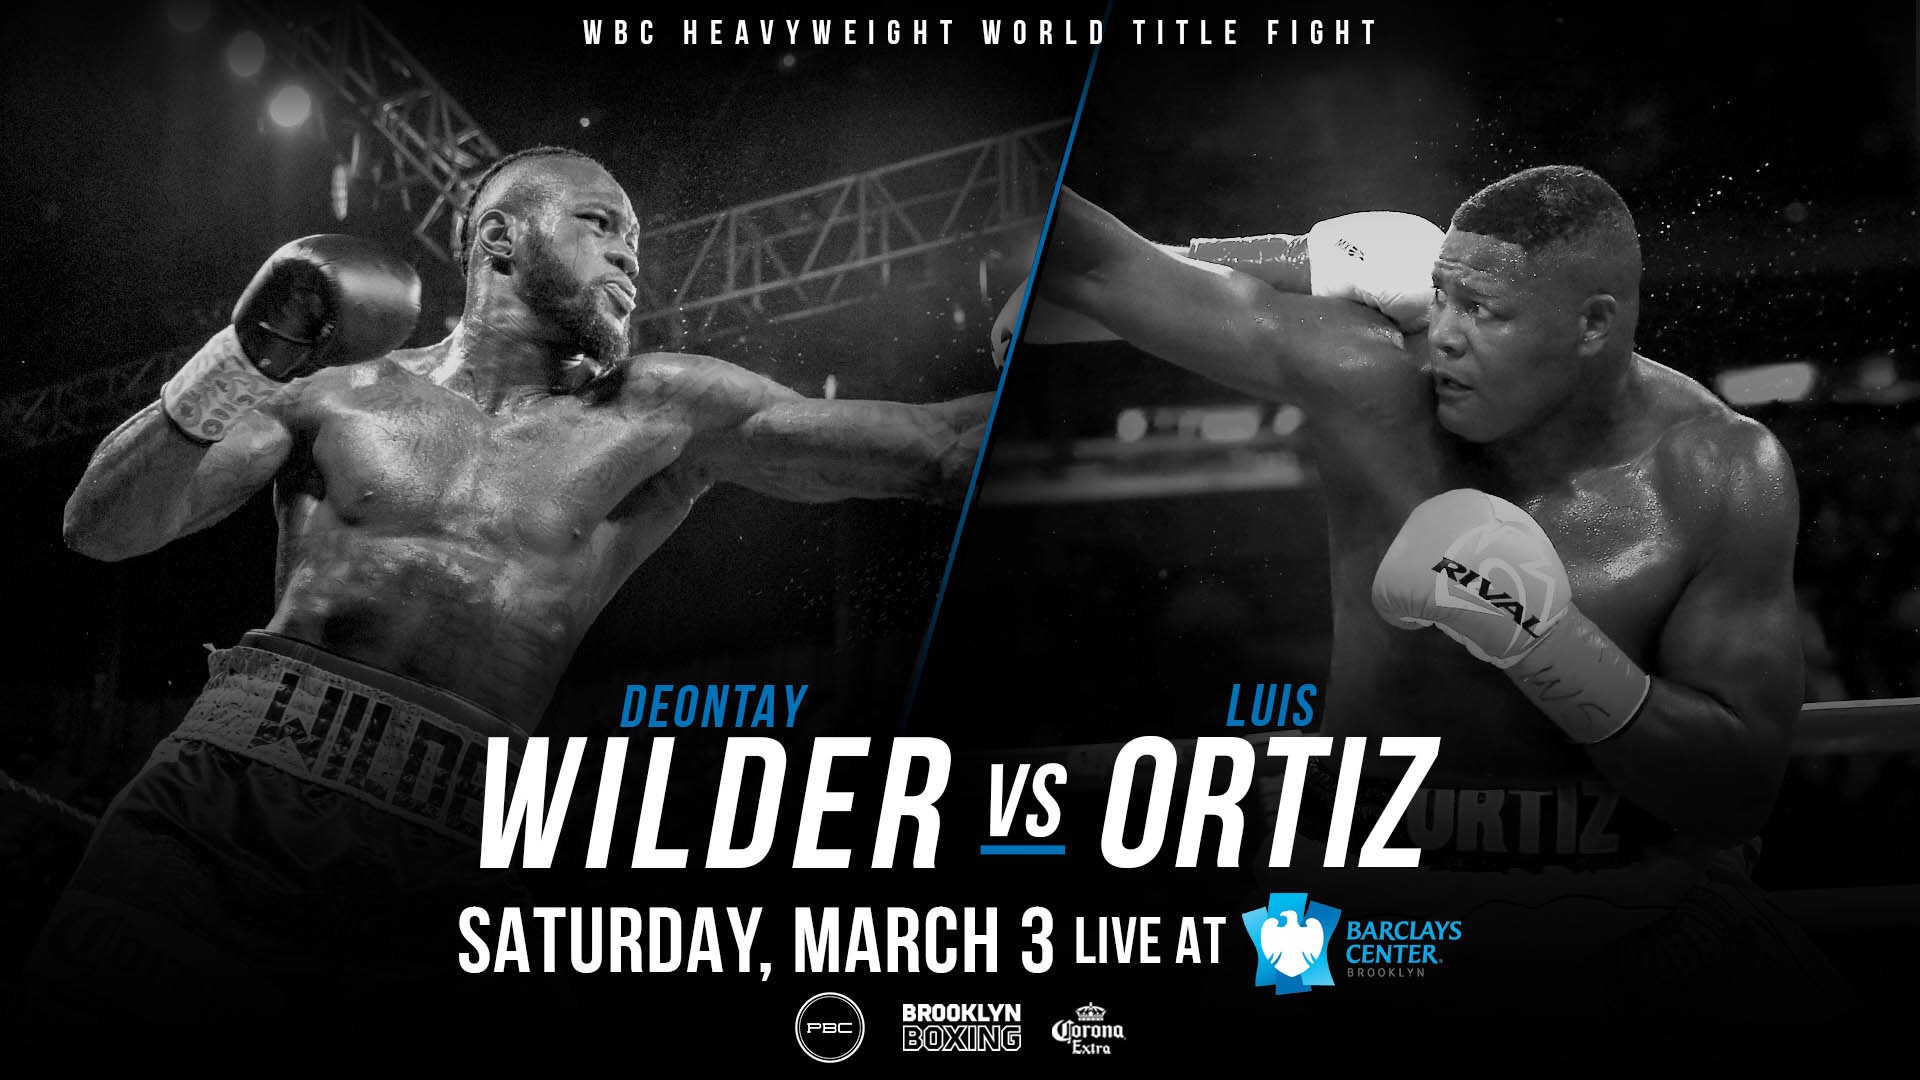 PBC This Just In: Wilder vs Ortiz announced for March 3, 20181920 x 1080